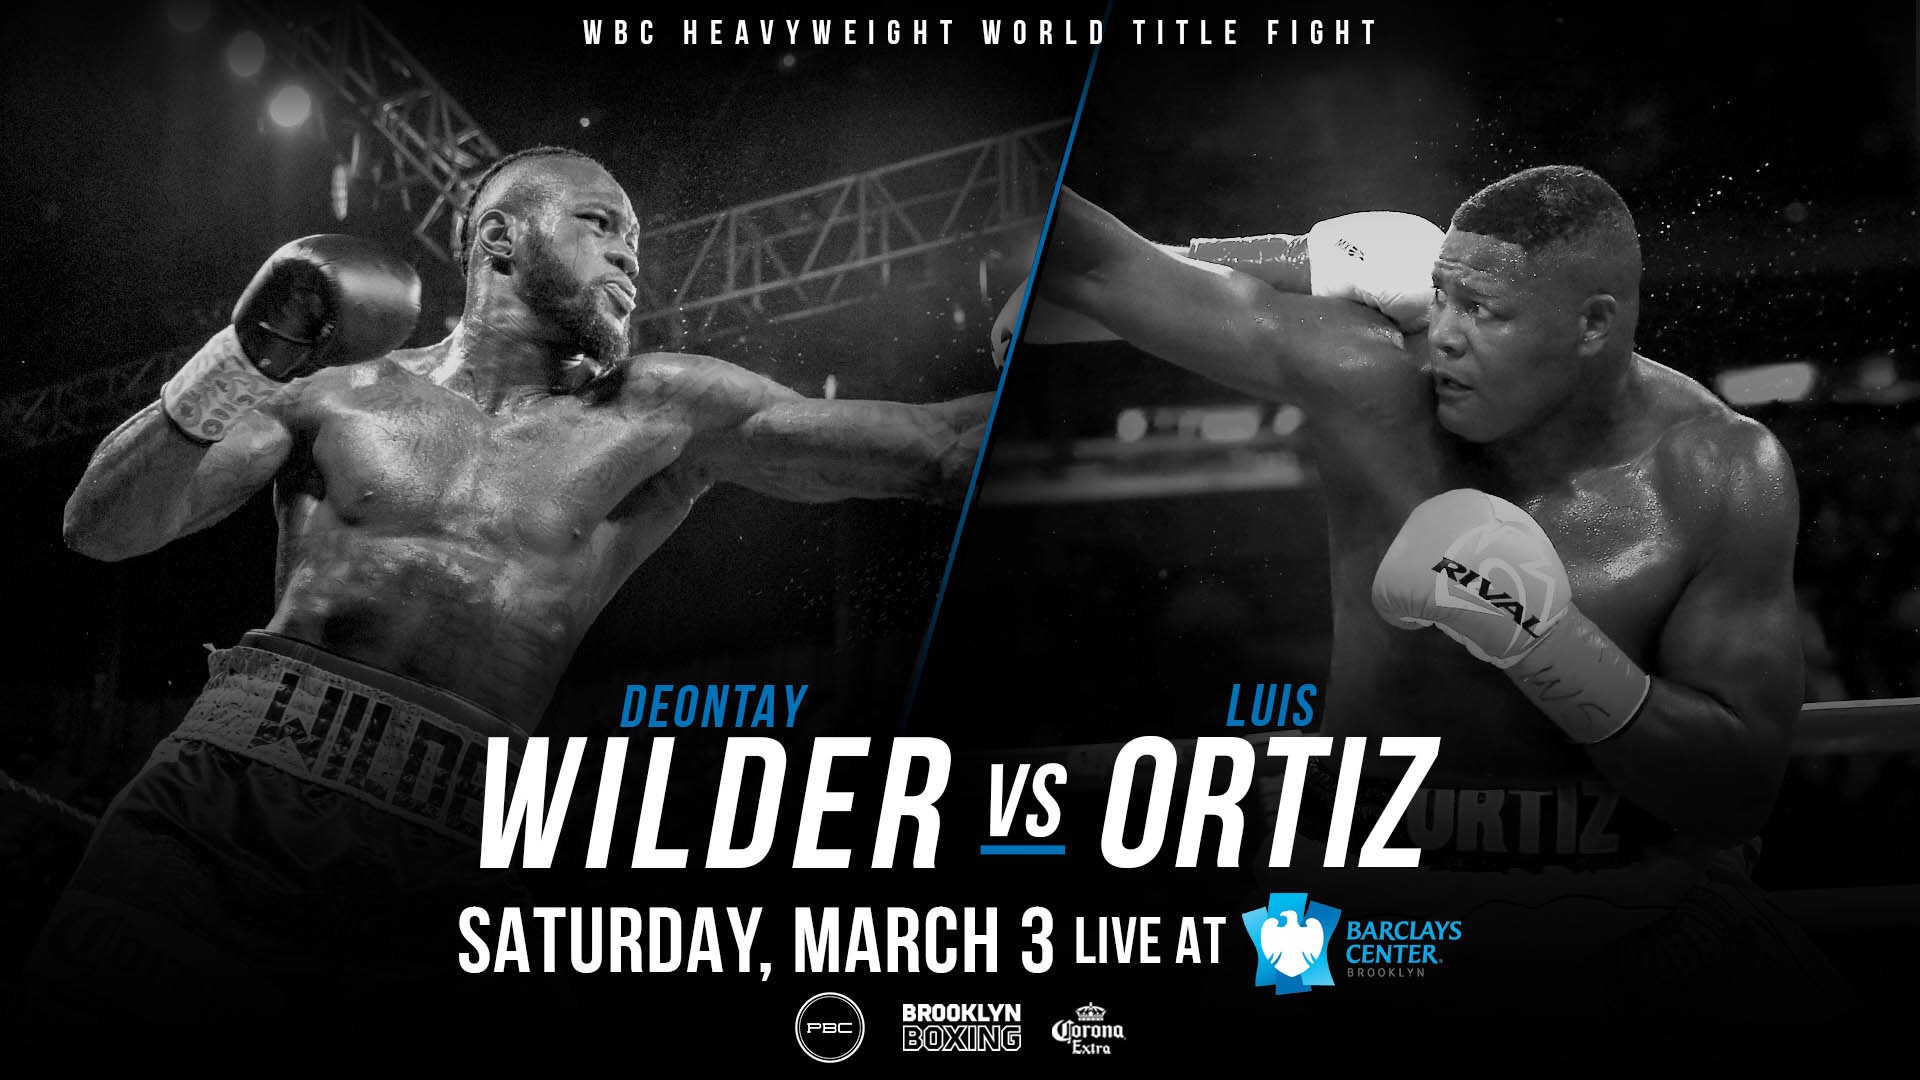 PBC This Just In: Wilder vs Ortiz announced for March 3, 20181920 x 1080